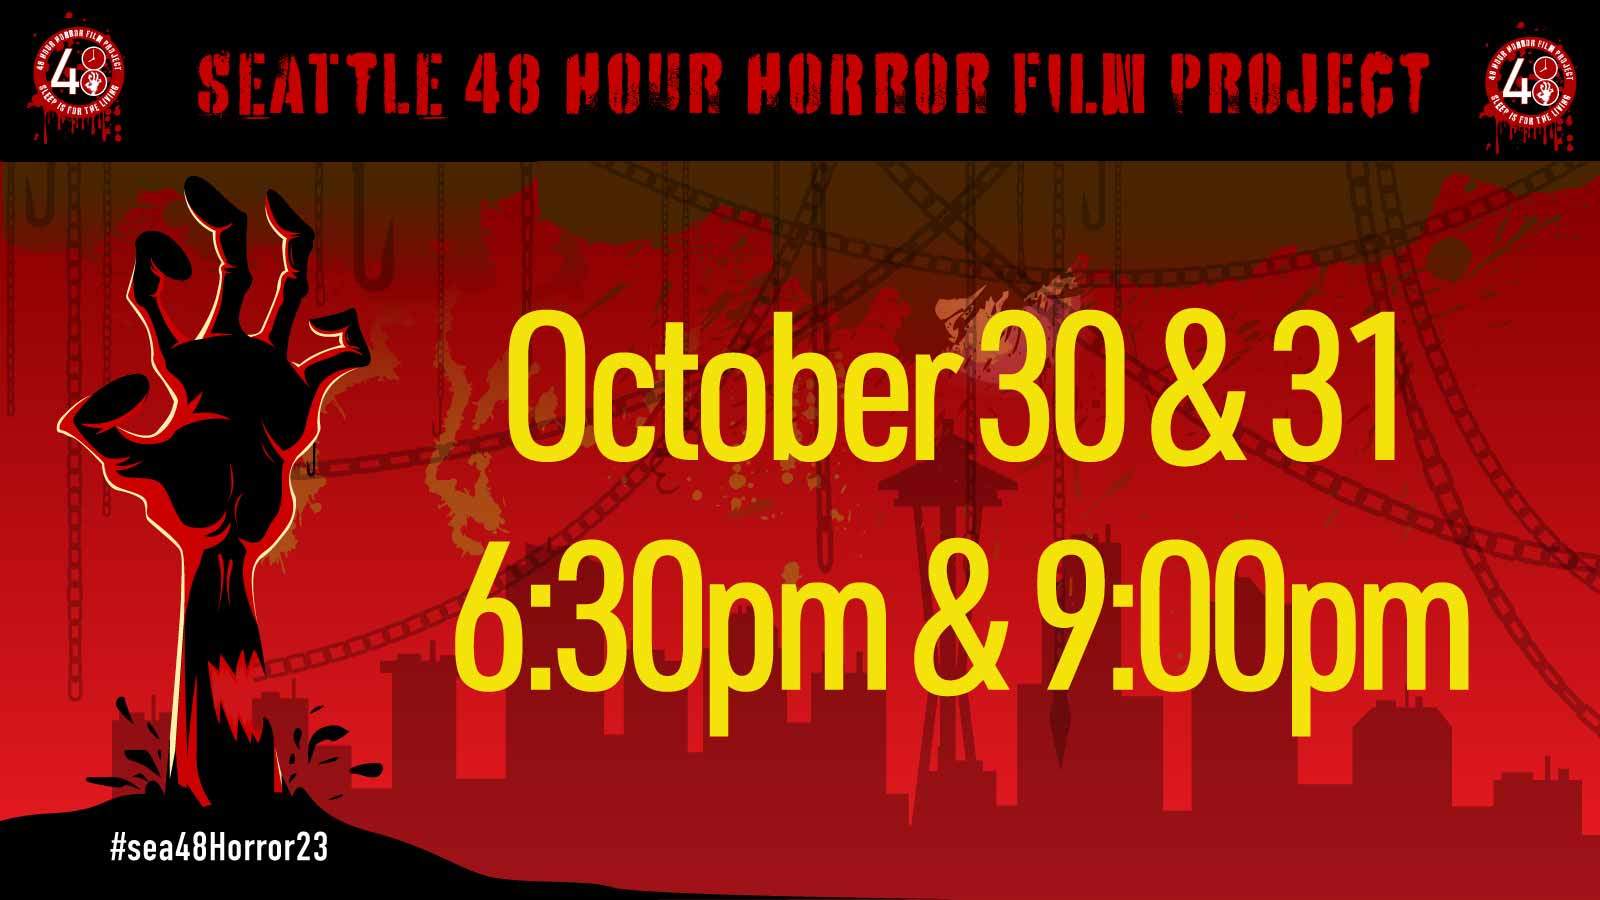 10th Annual Seattle 48 Hour Horror Film project